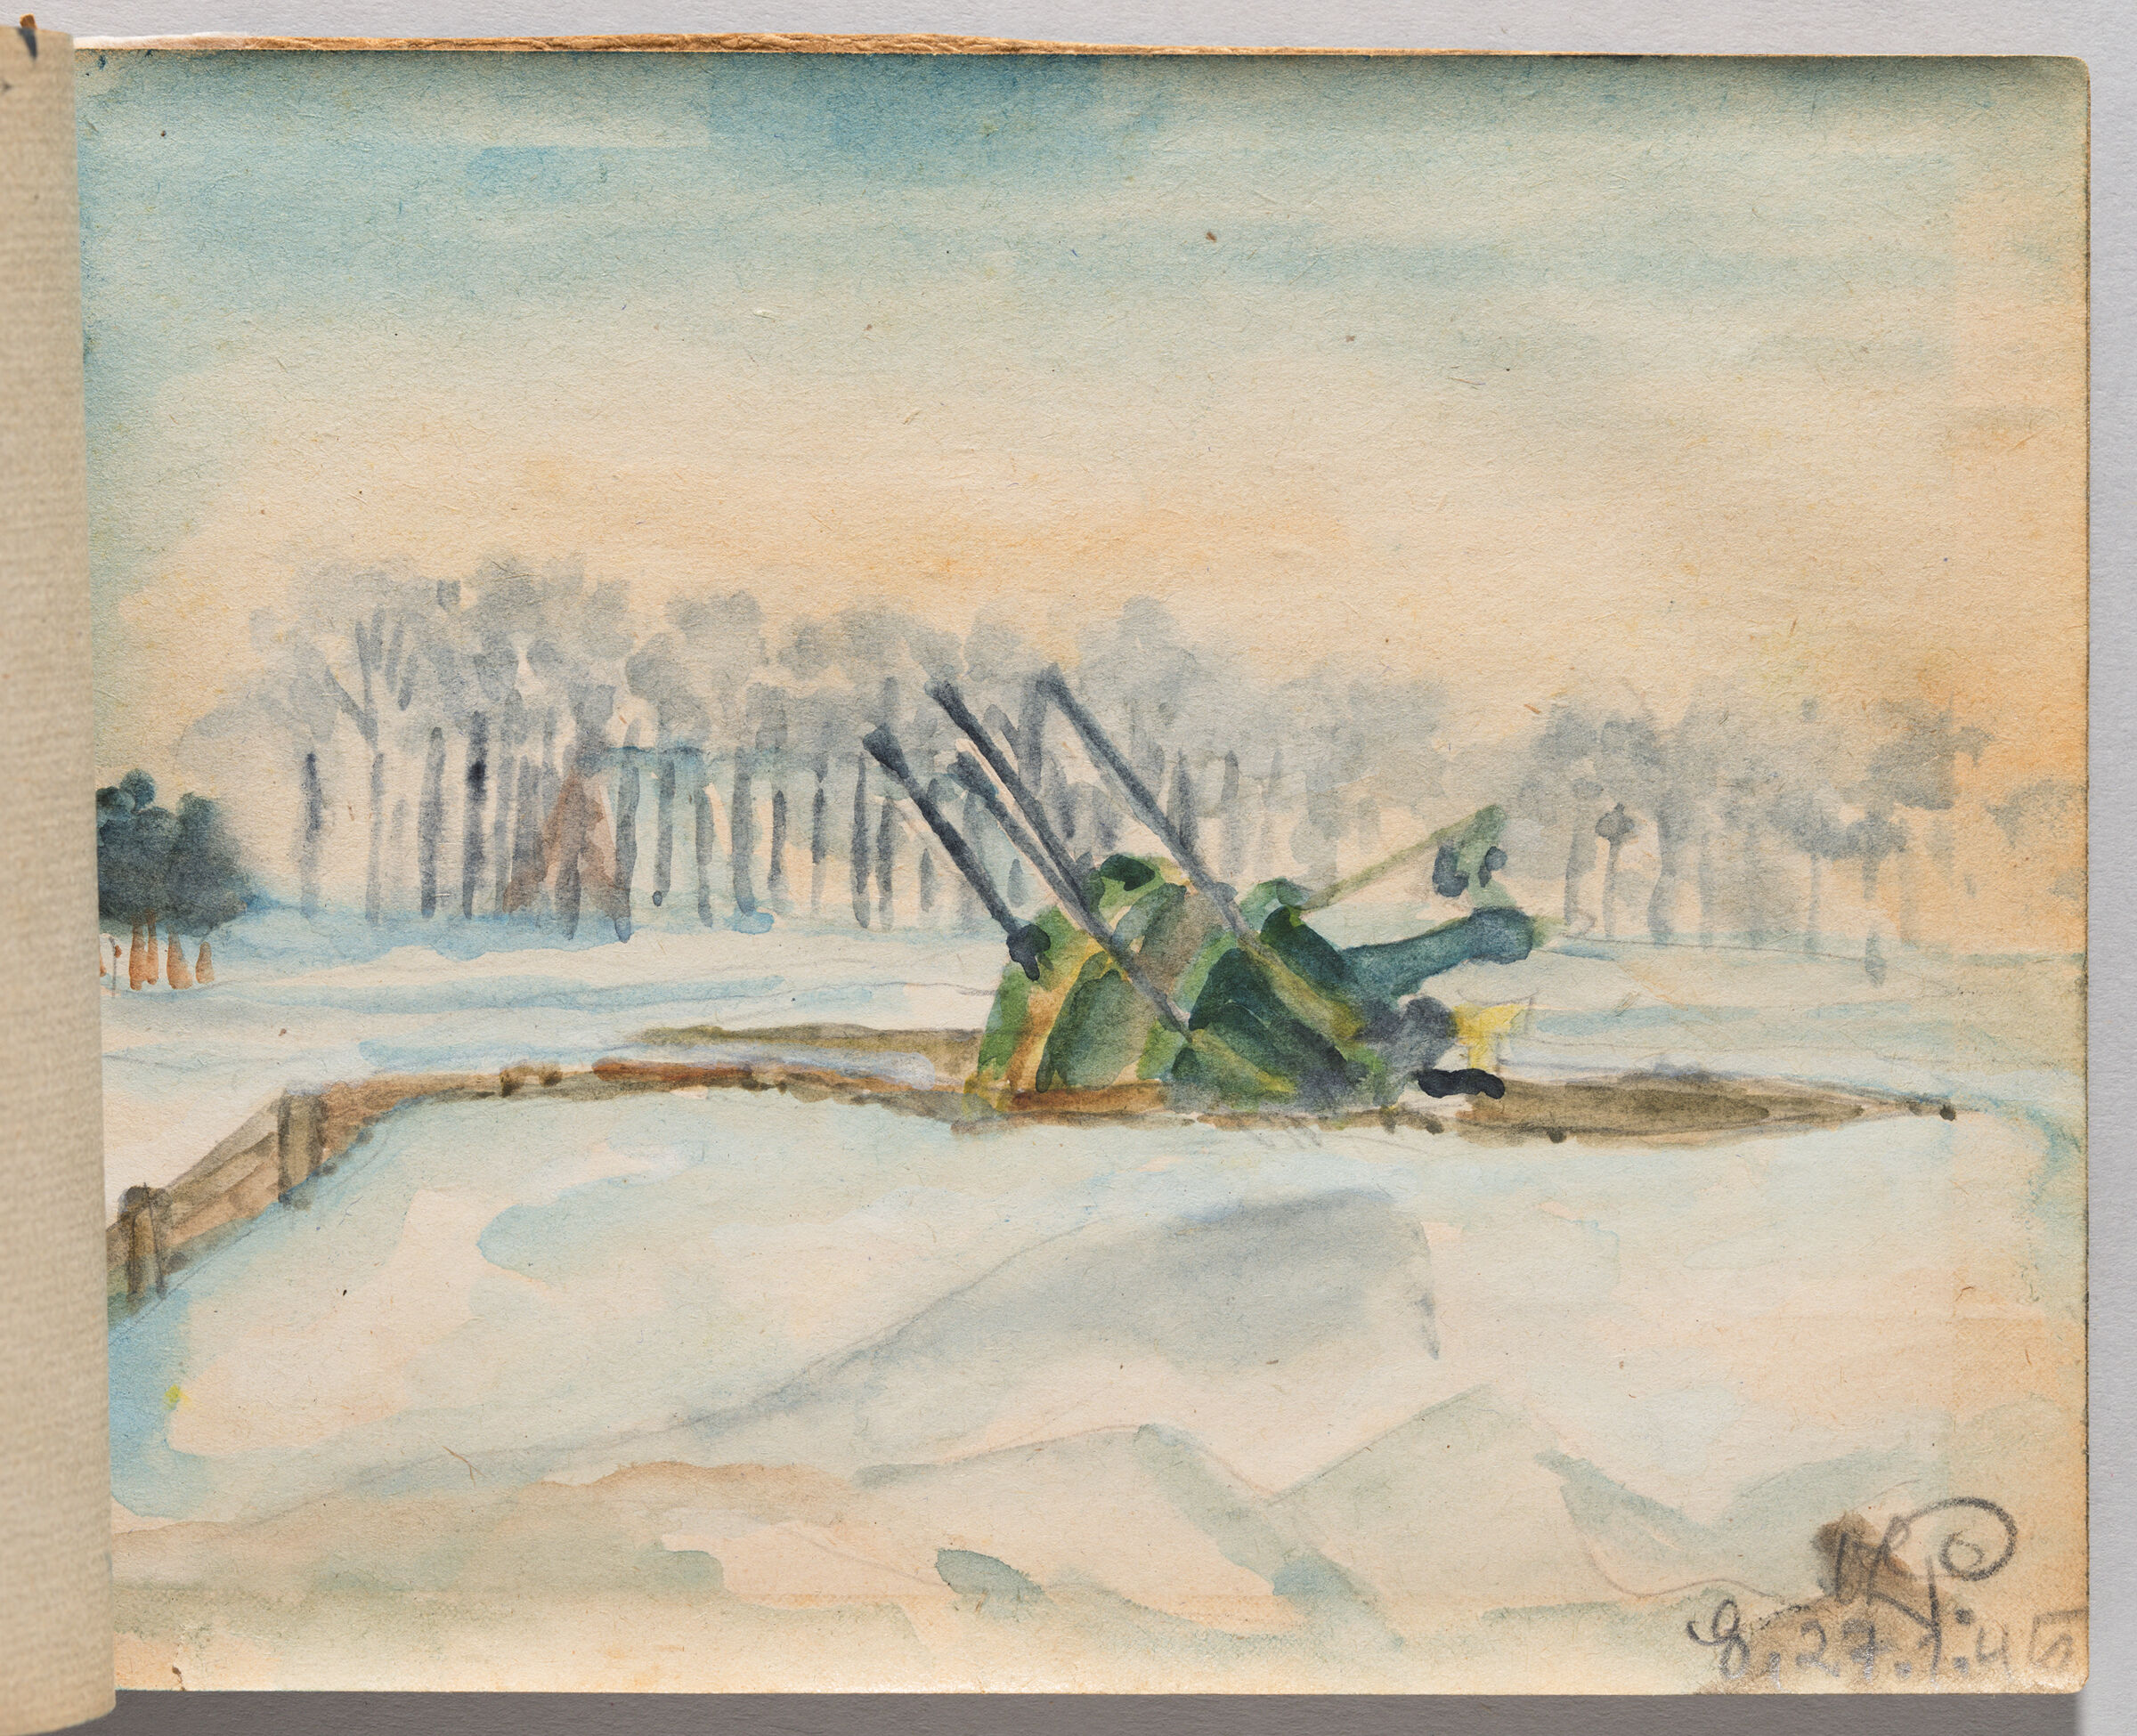 Untitled (Blank, Left Page); Untitled (German Anti-Aircraft Gun In Snow, Right Page)